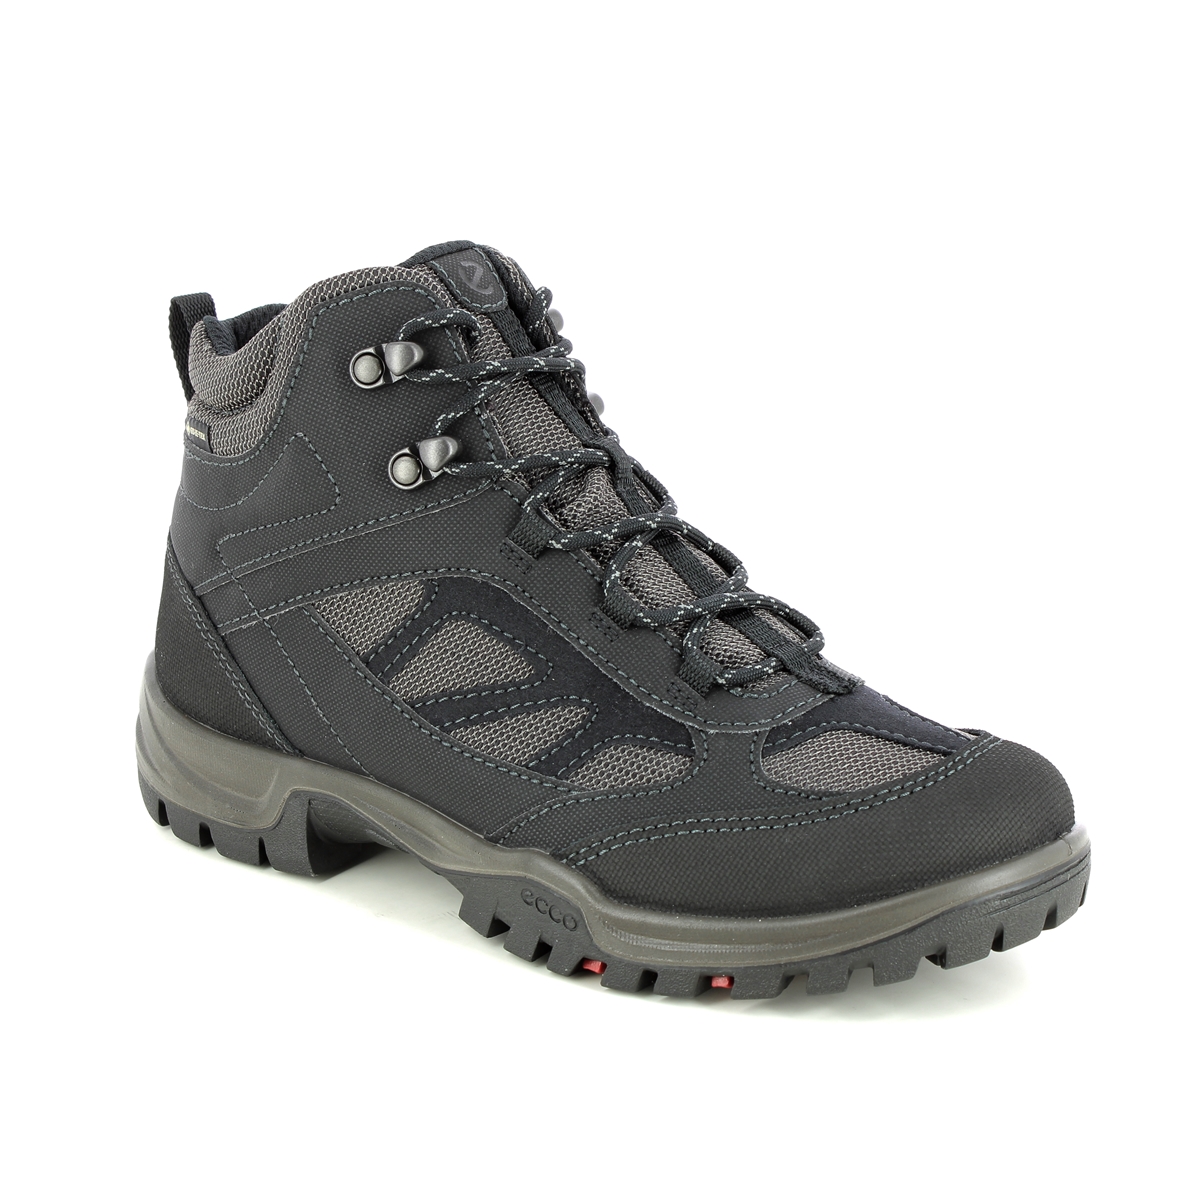 Ecco Xpedition W Mid Gtx Black Womens Walking Boots 811273-51526 In Size 39 In Plain Black